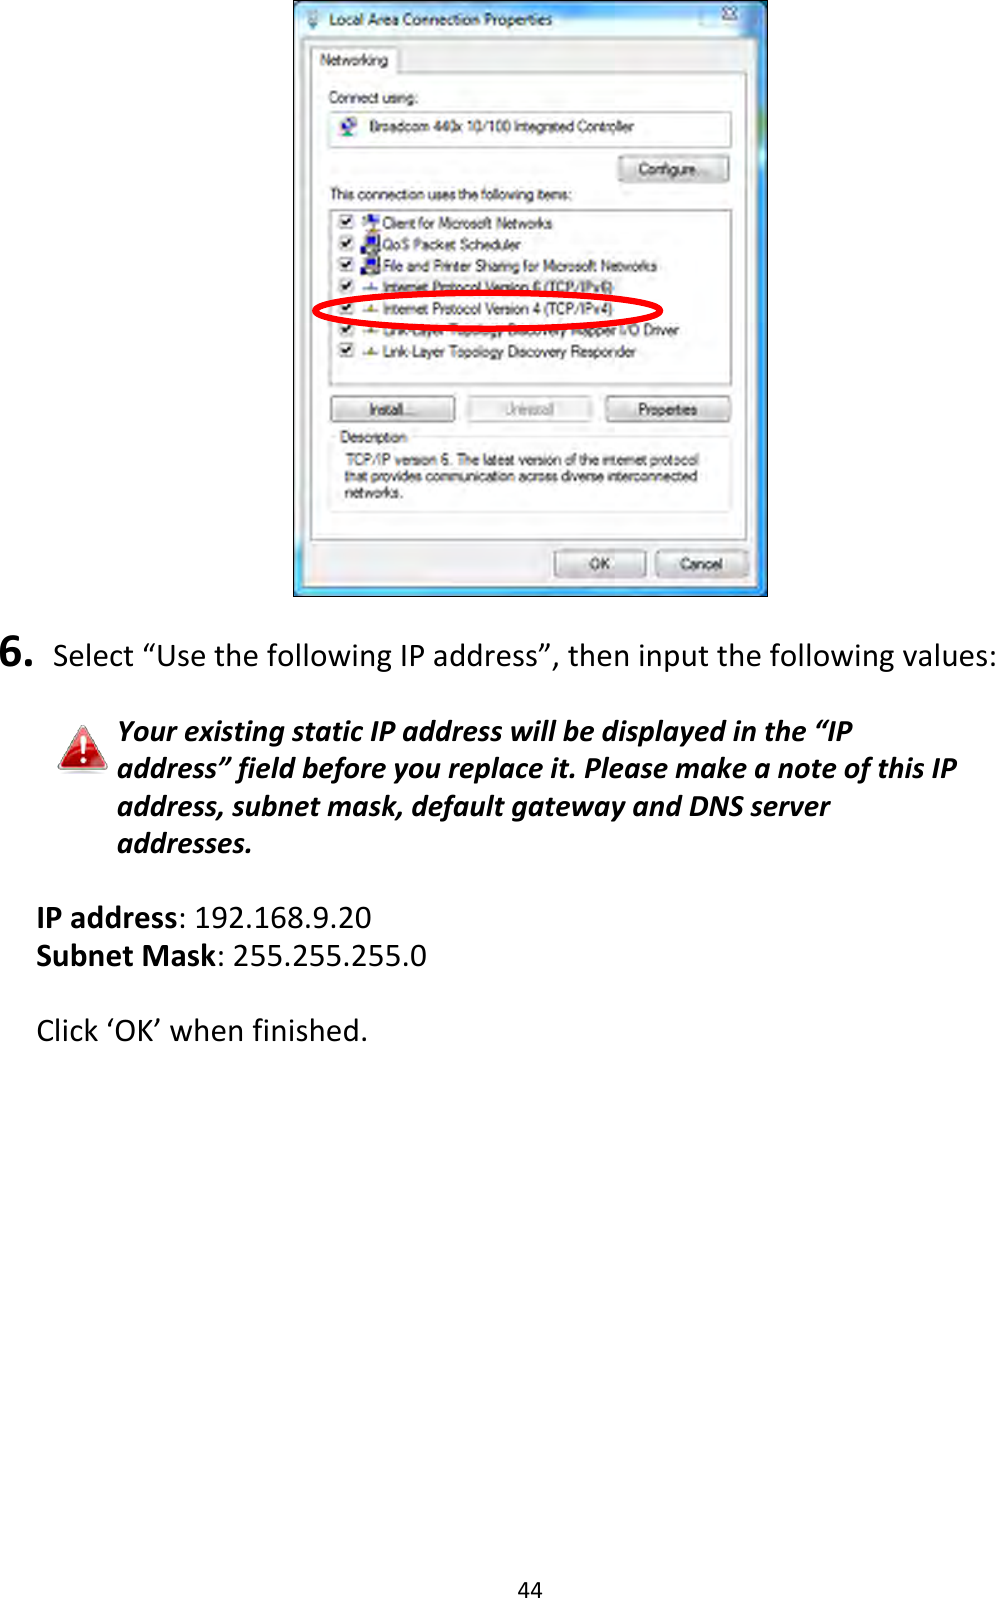 44   6.  Select “Use the following IP address”, then input the following values:  Your existing static IP address will be displayed in the “IP address” field before you replace it. Please make a note of this IP address, subnet mask, default gateway and DNS server addresses.  IP address: 192.168.9.20 Subnet Mask: 255.255.255.0  Click ‘OK’ when finished.  